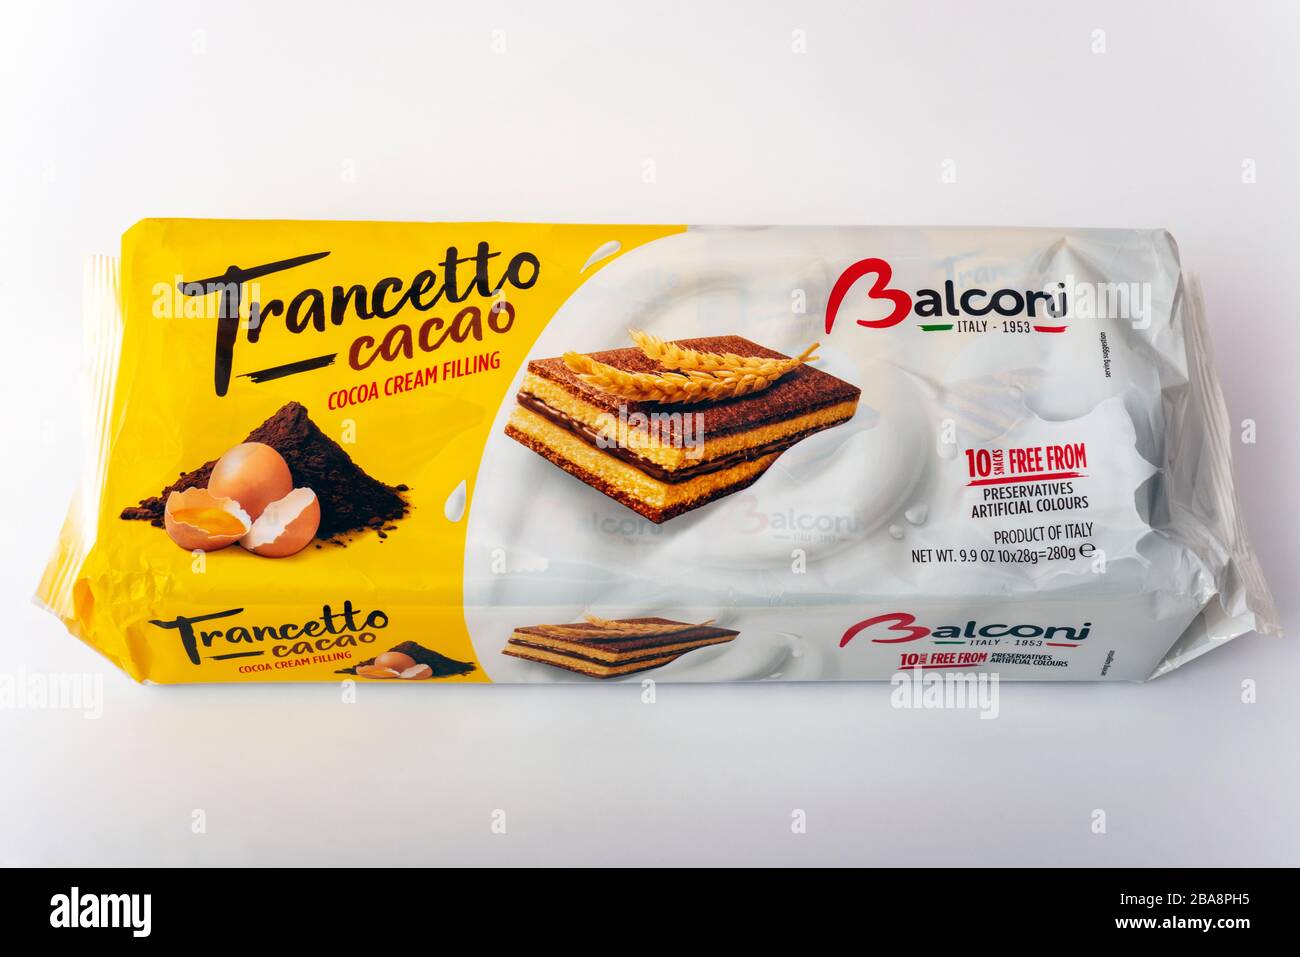 Balconi Trancetto cacao Italian wafer biscuits Stock Photo